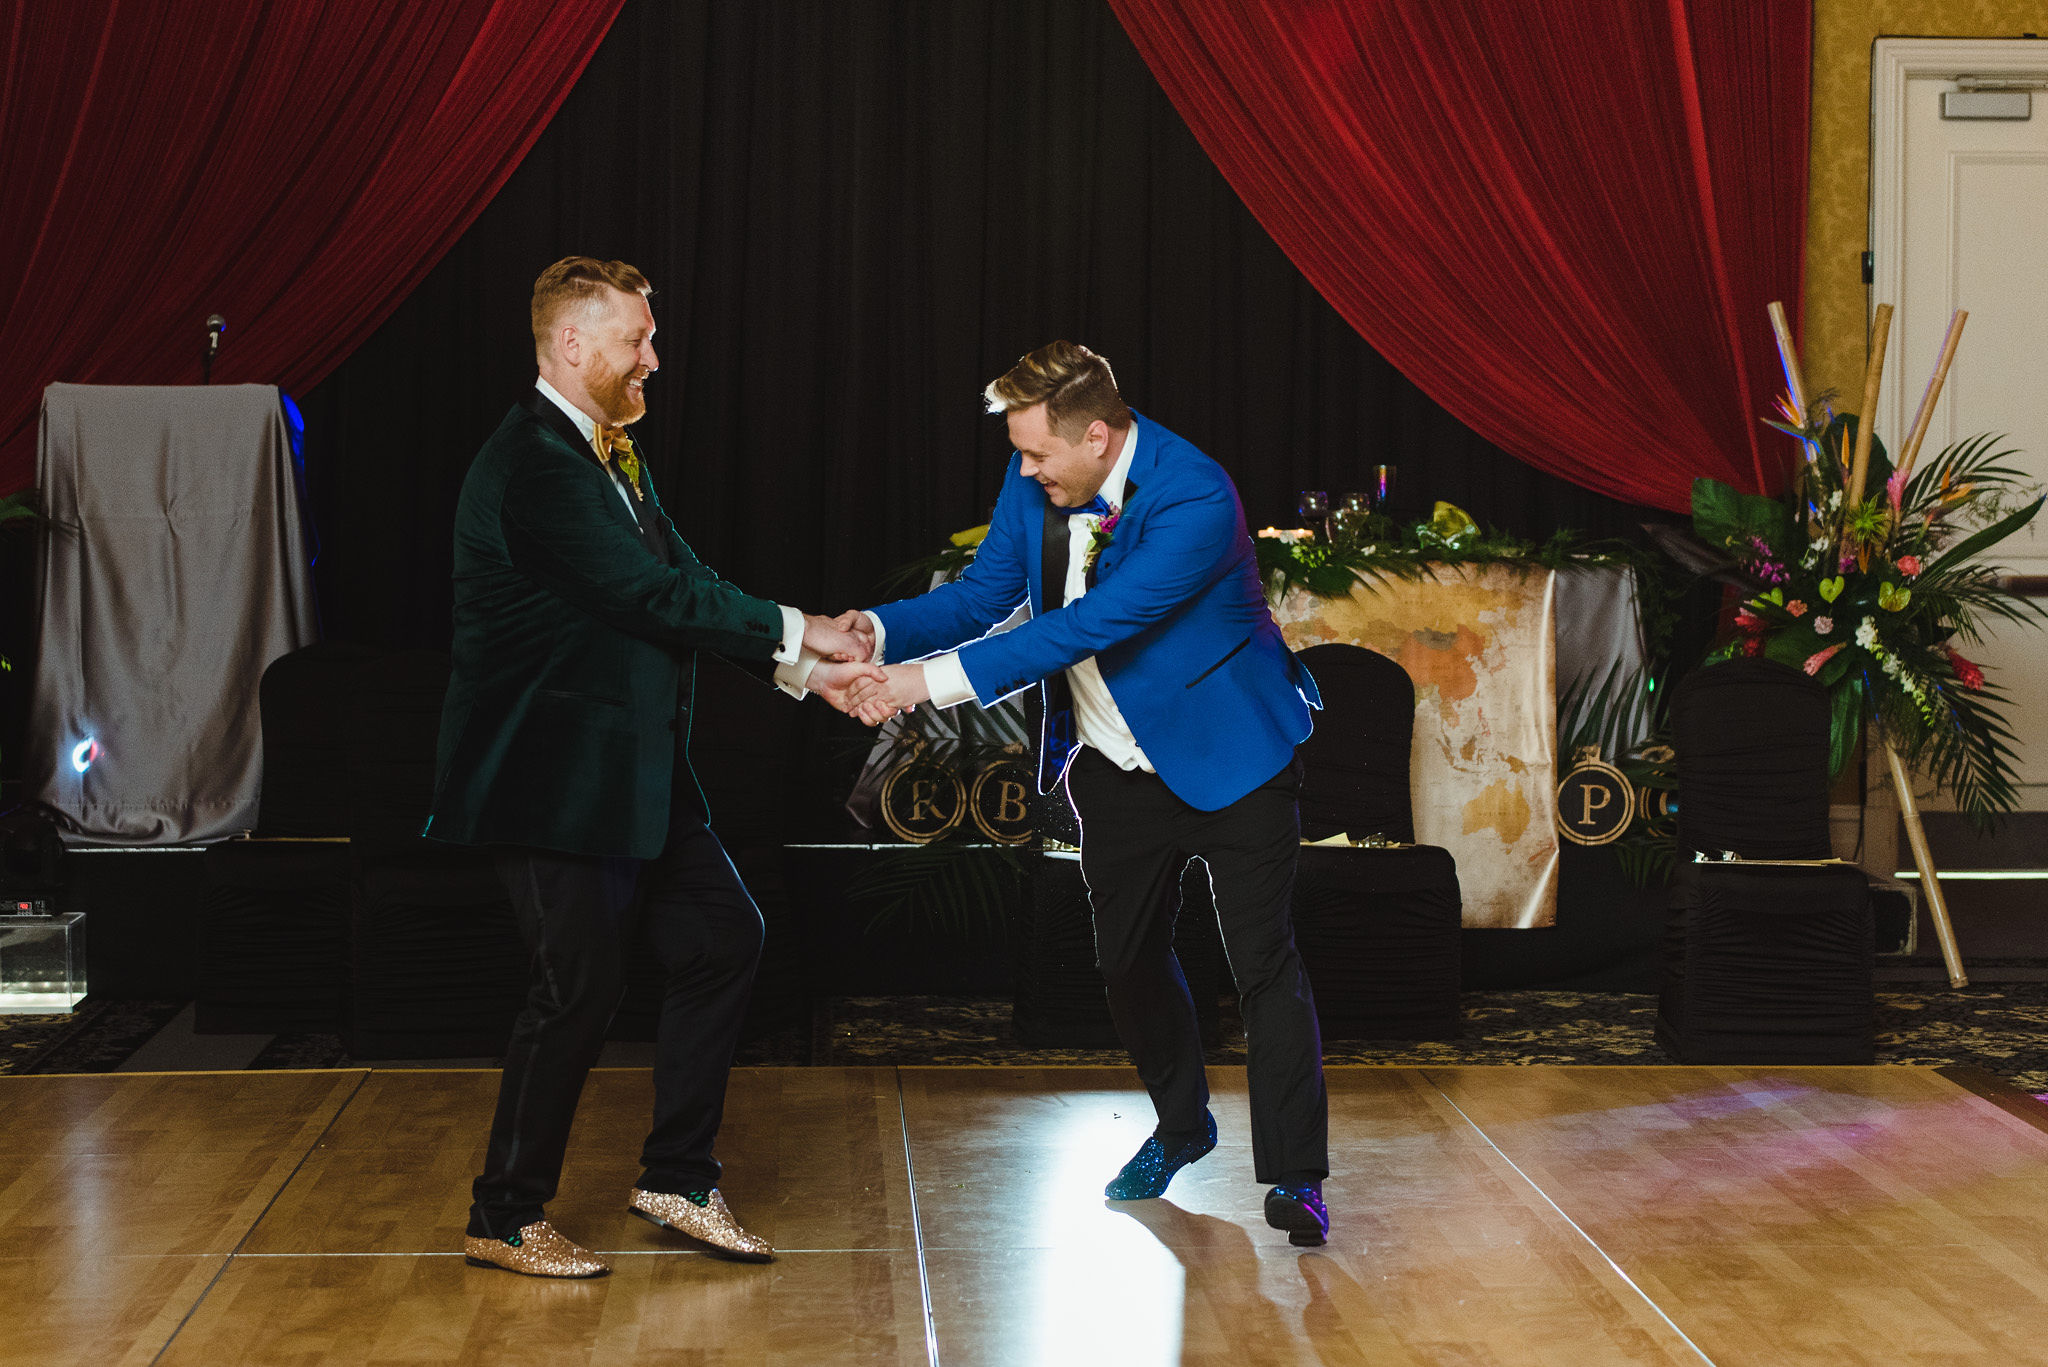 grooms holding hands and dancing during their fun wedding reception at the Hilton Fallsview in Niagara Falls